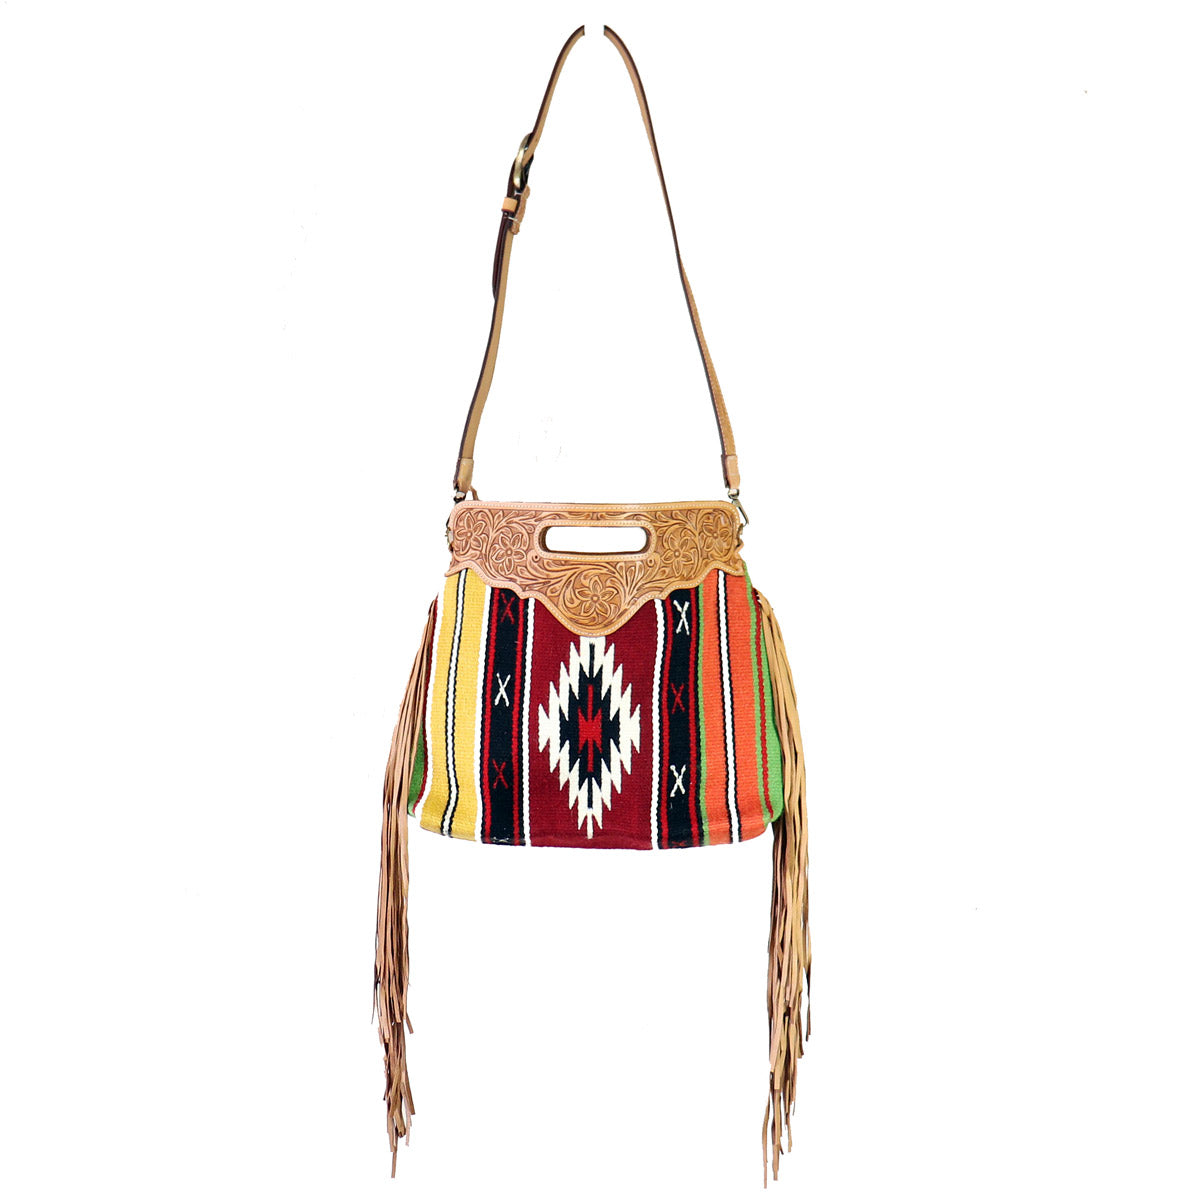 Boho Western Fringe Purse in Native Wool and Leather - Handmade by